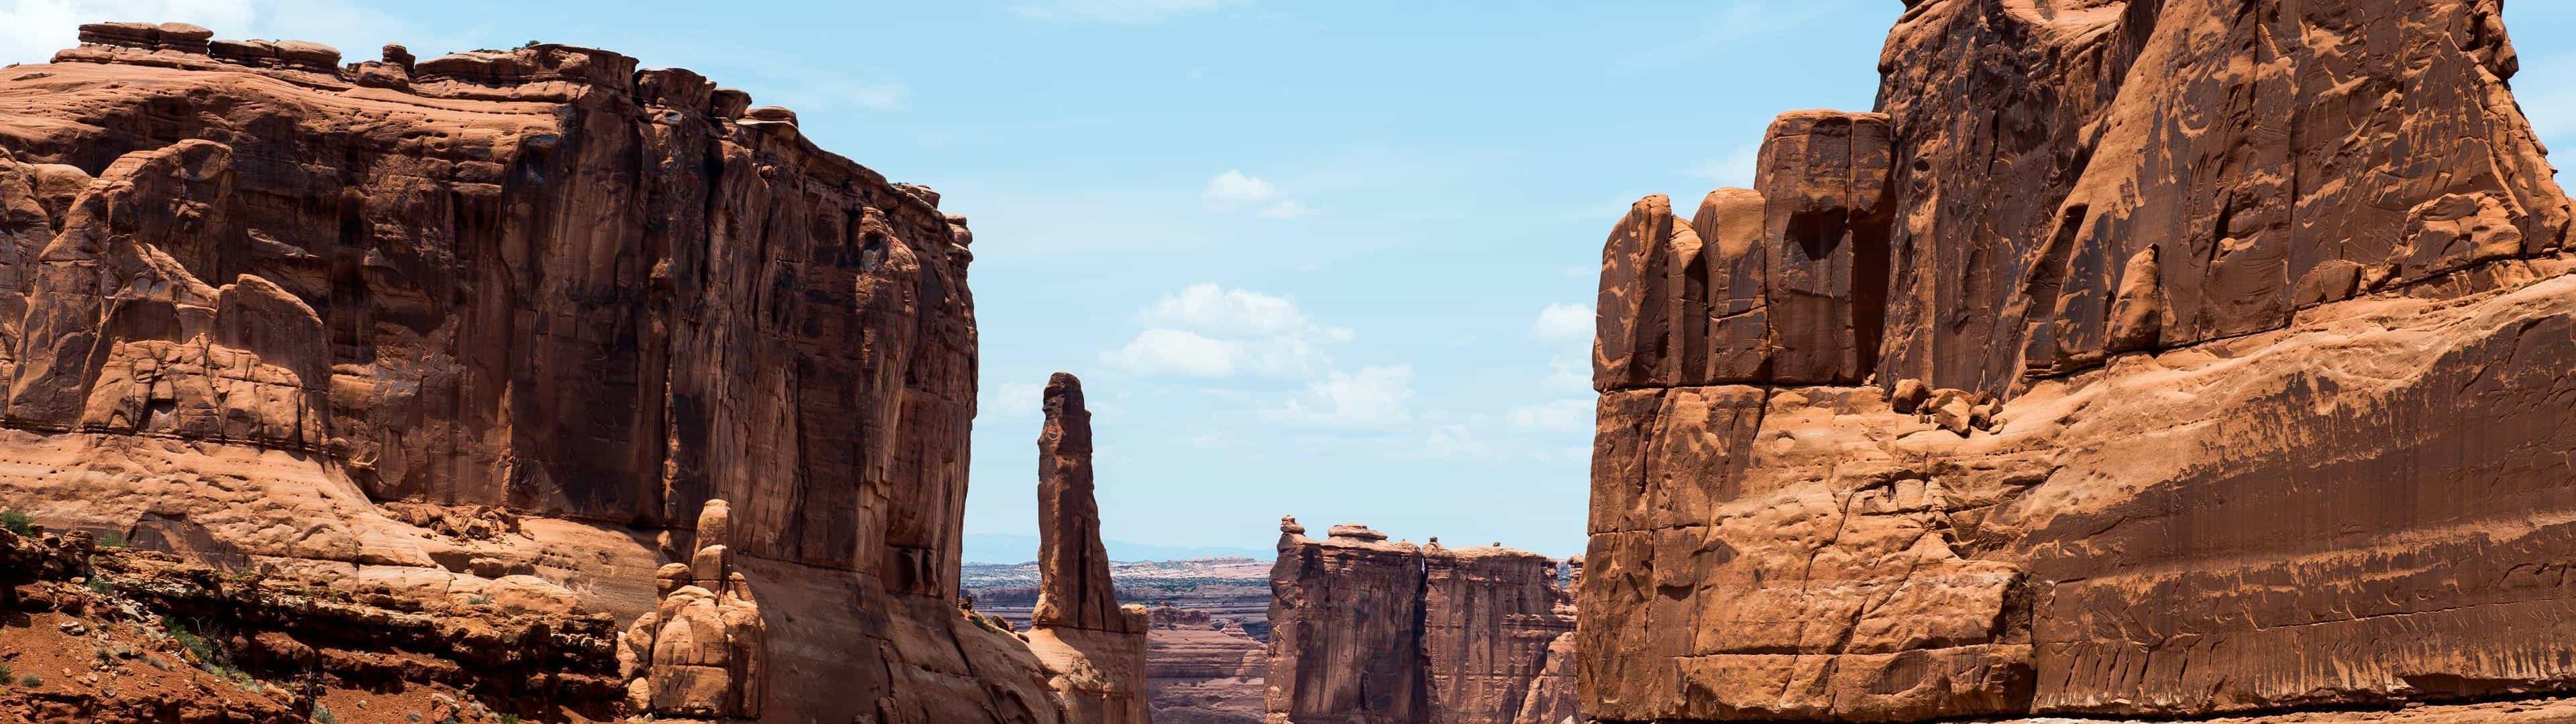 Courthouse Towers, Arches National Park, Dual monitor wallpaper, United States, 3840x1080 Dual Screen Desktop